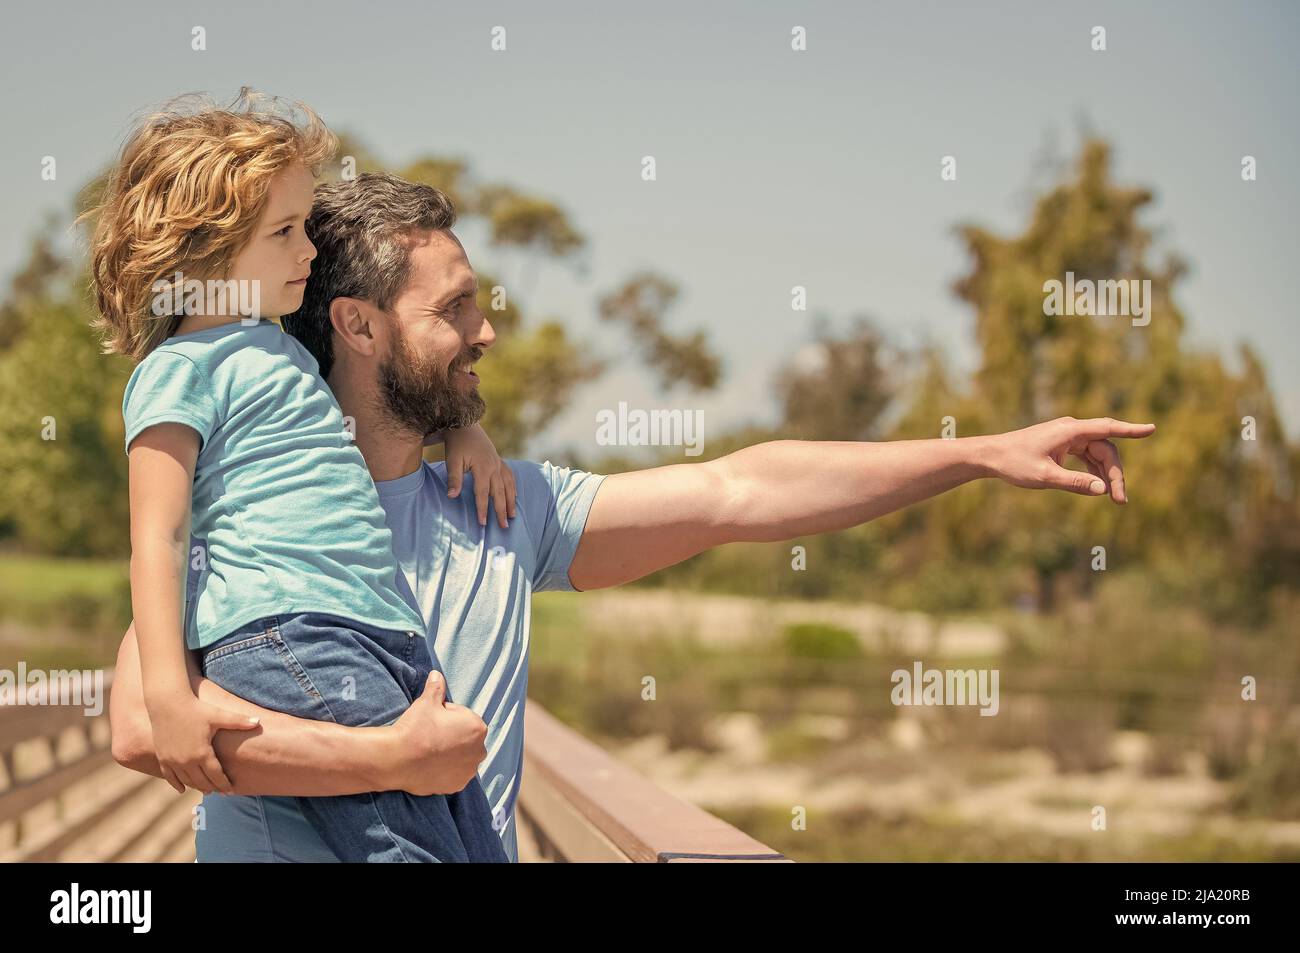 happy father holding son on hands outdoor. family value. childhood and parenthood. Stock Photo